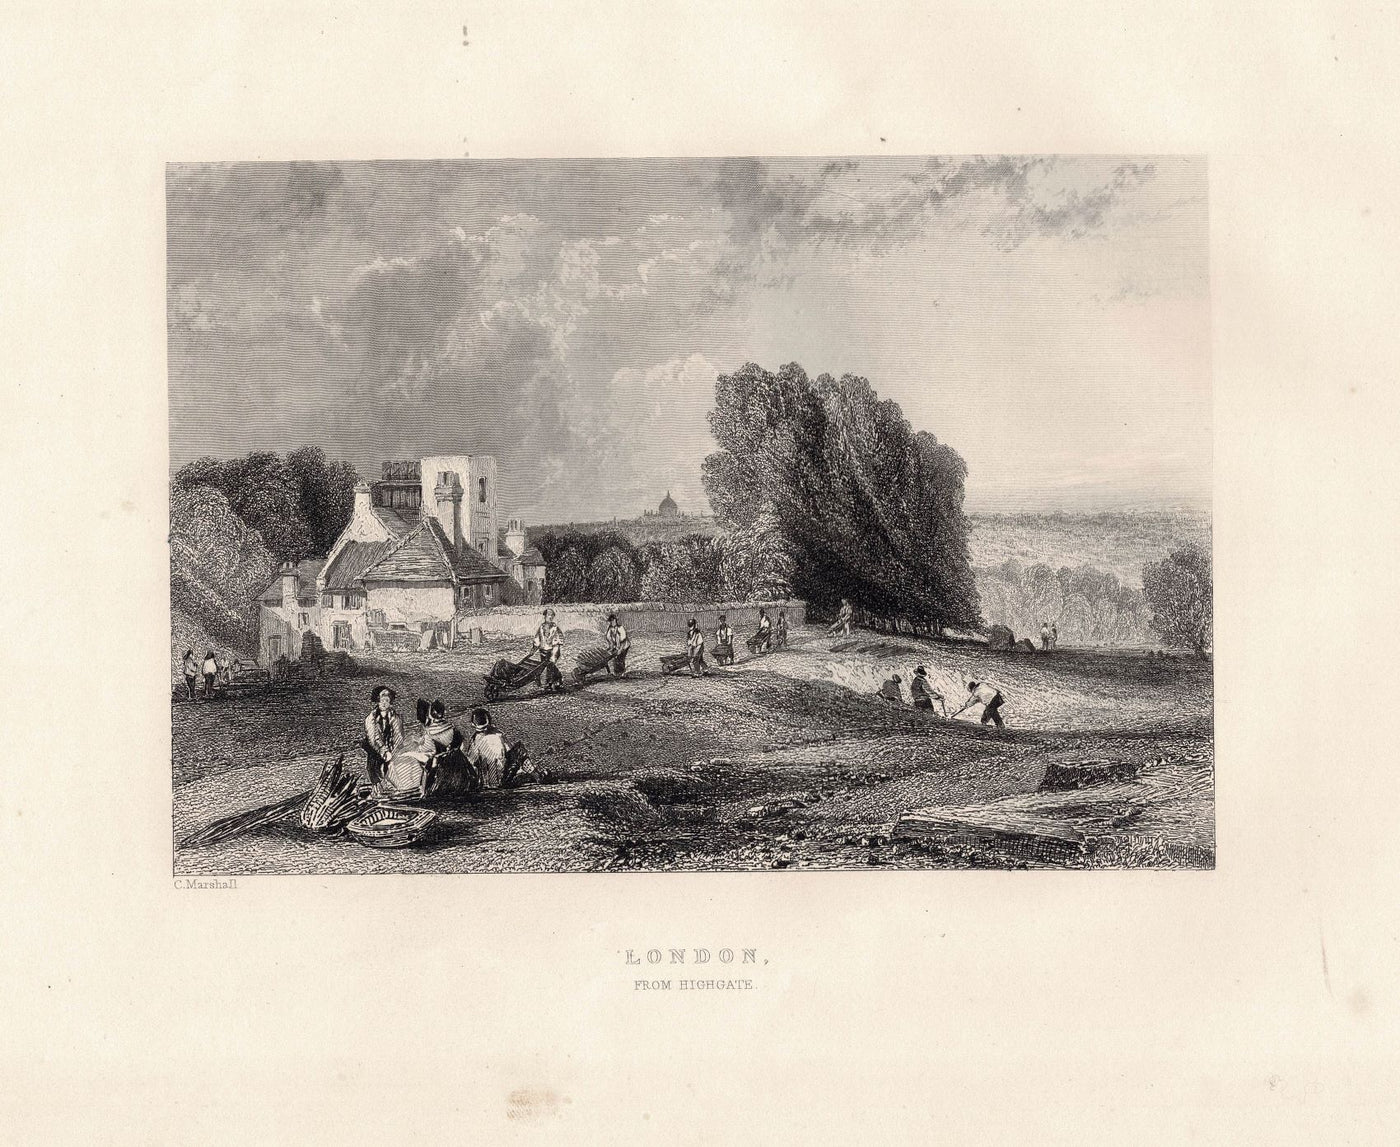 London from Highgate antique print published 1838